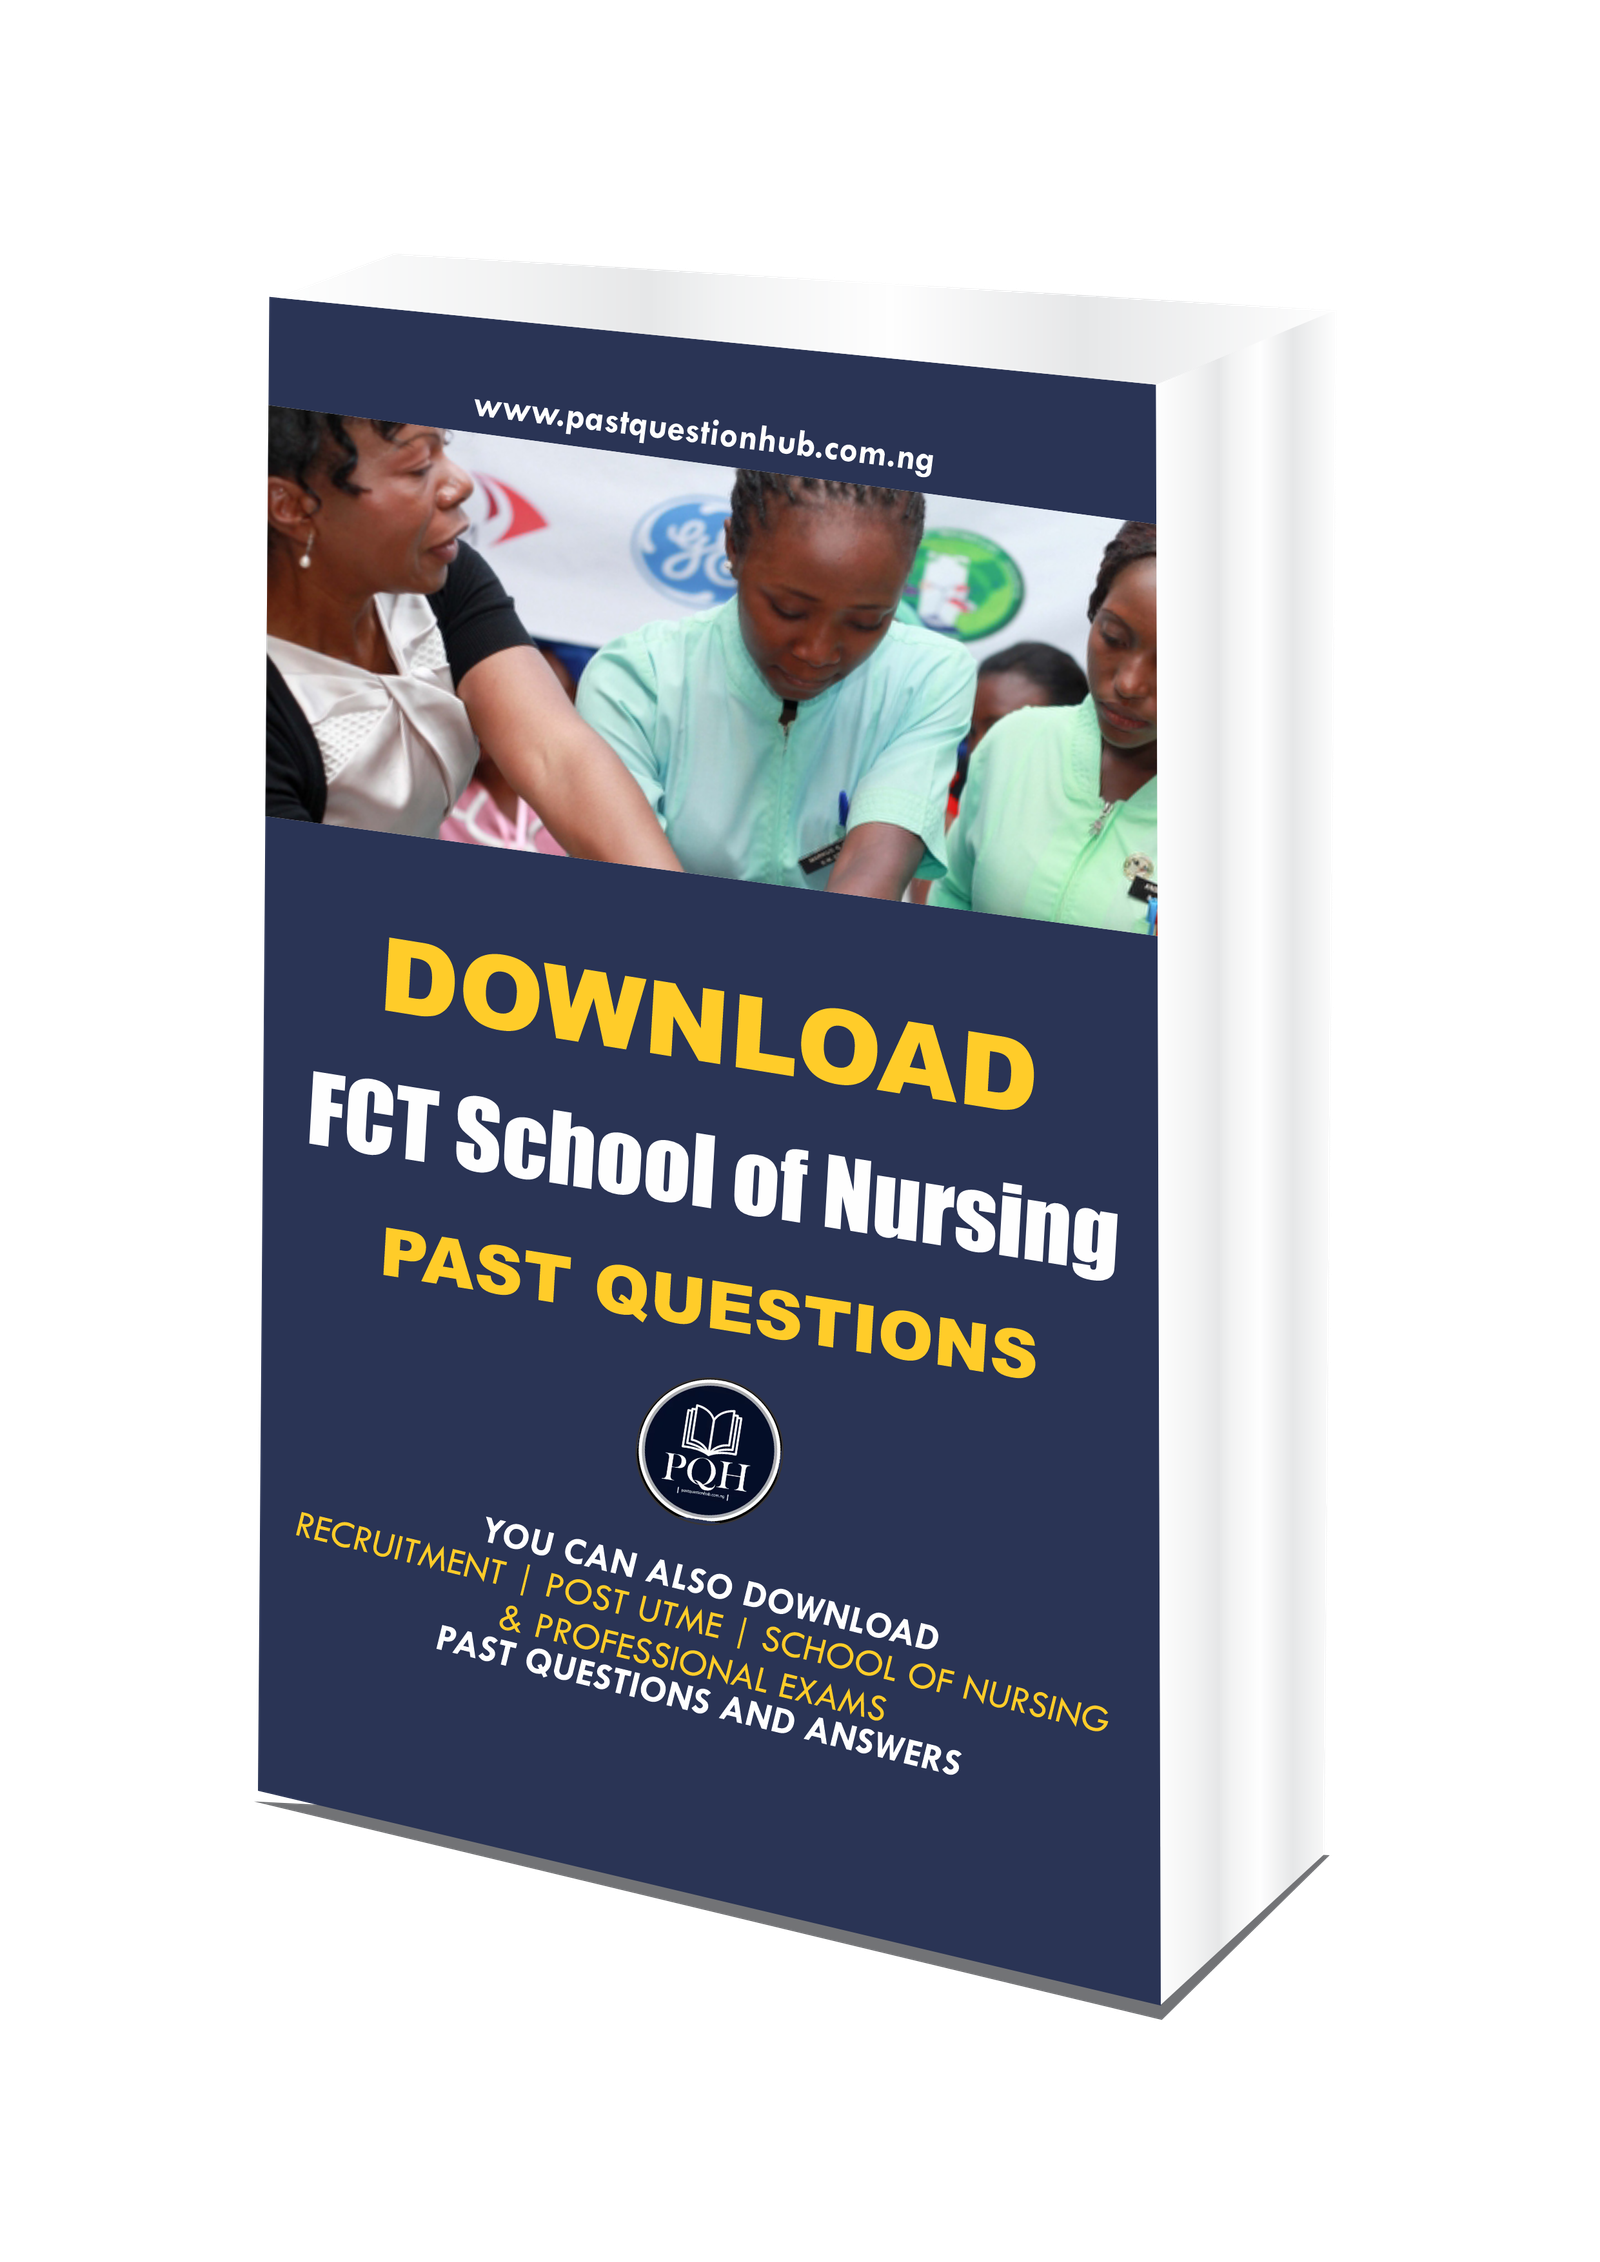 FCT School of Nursing Past Questions and Answers PDF